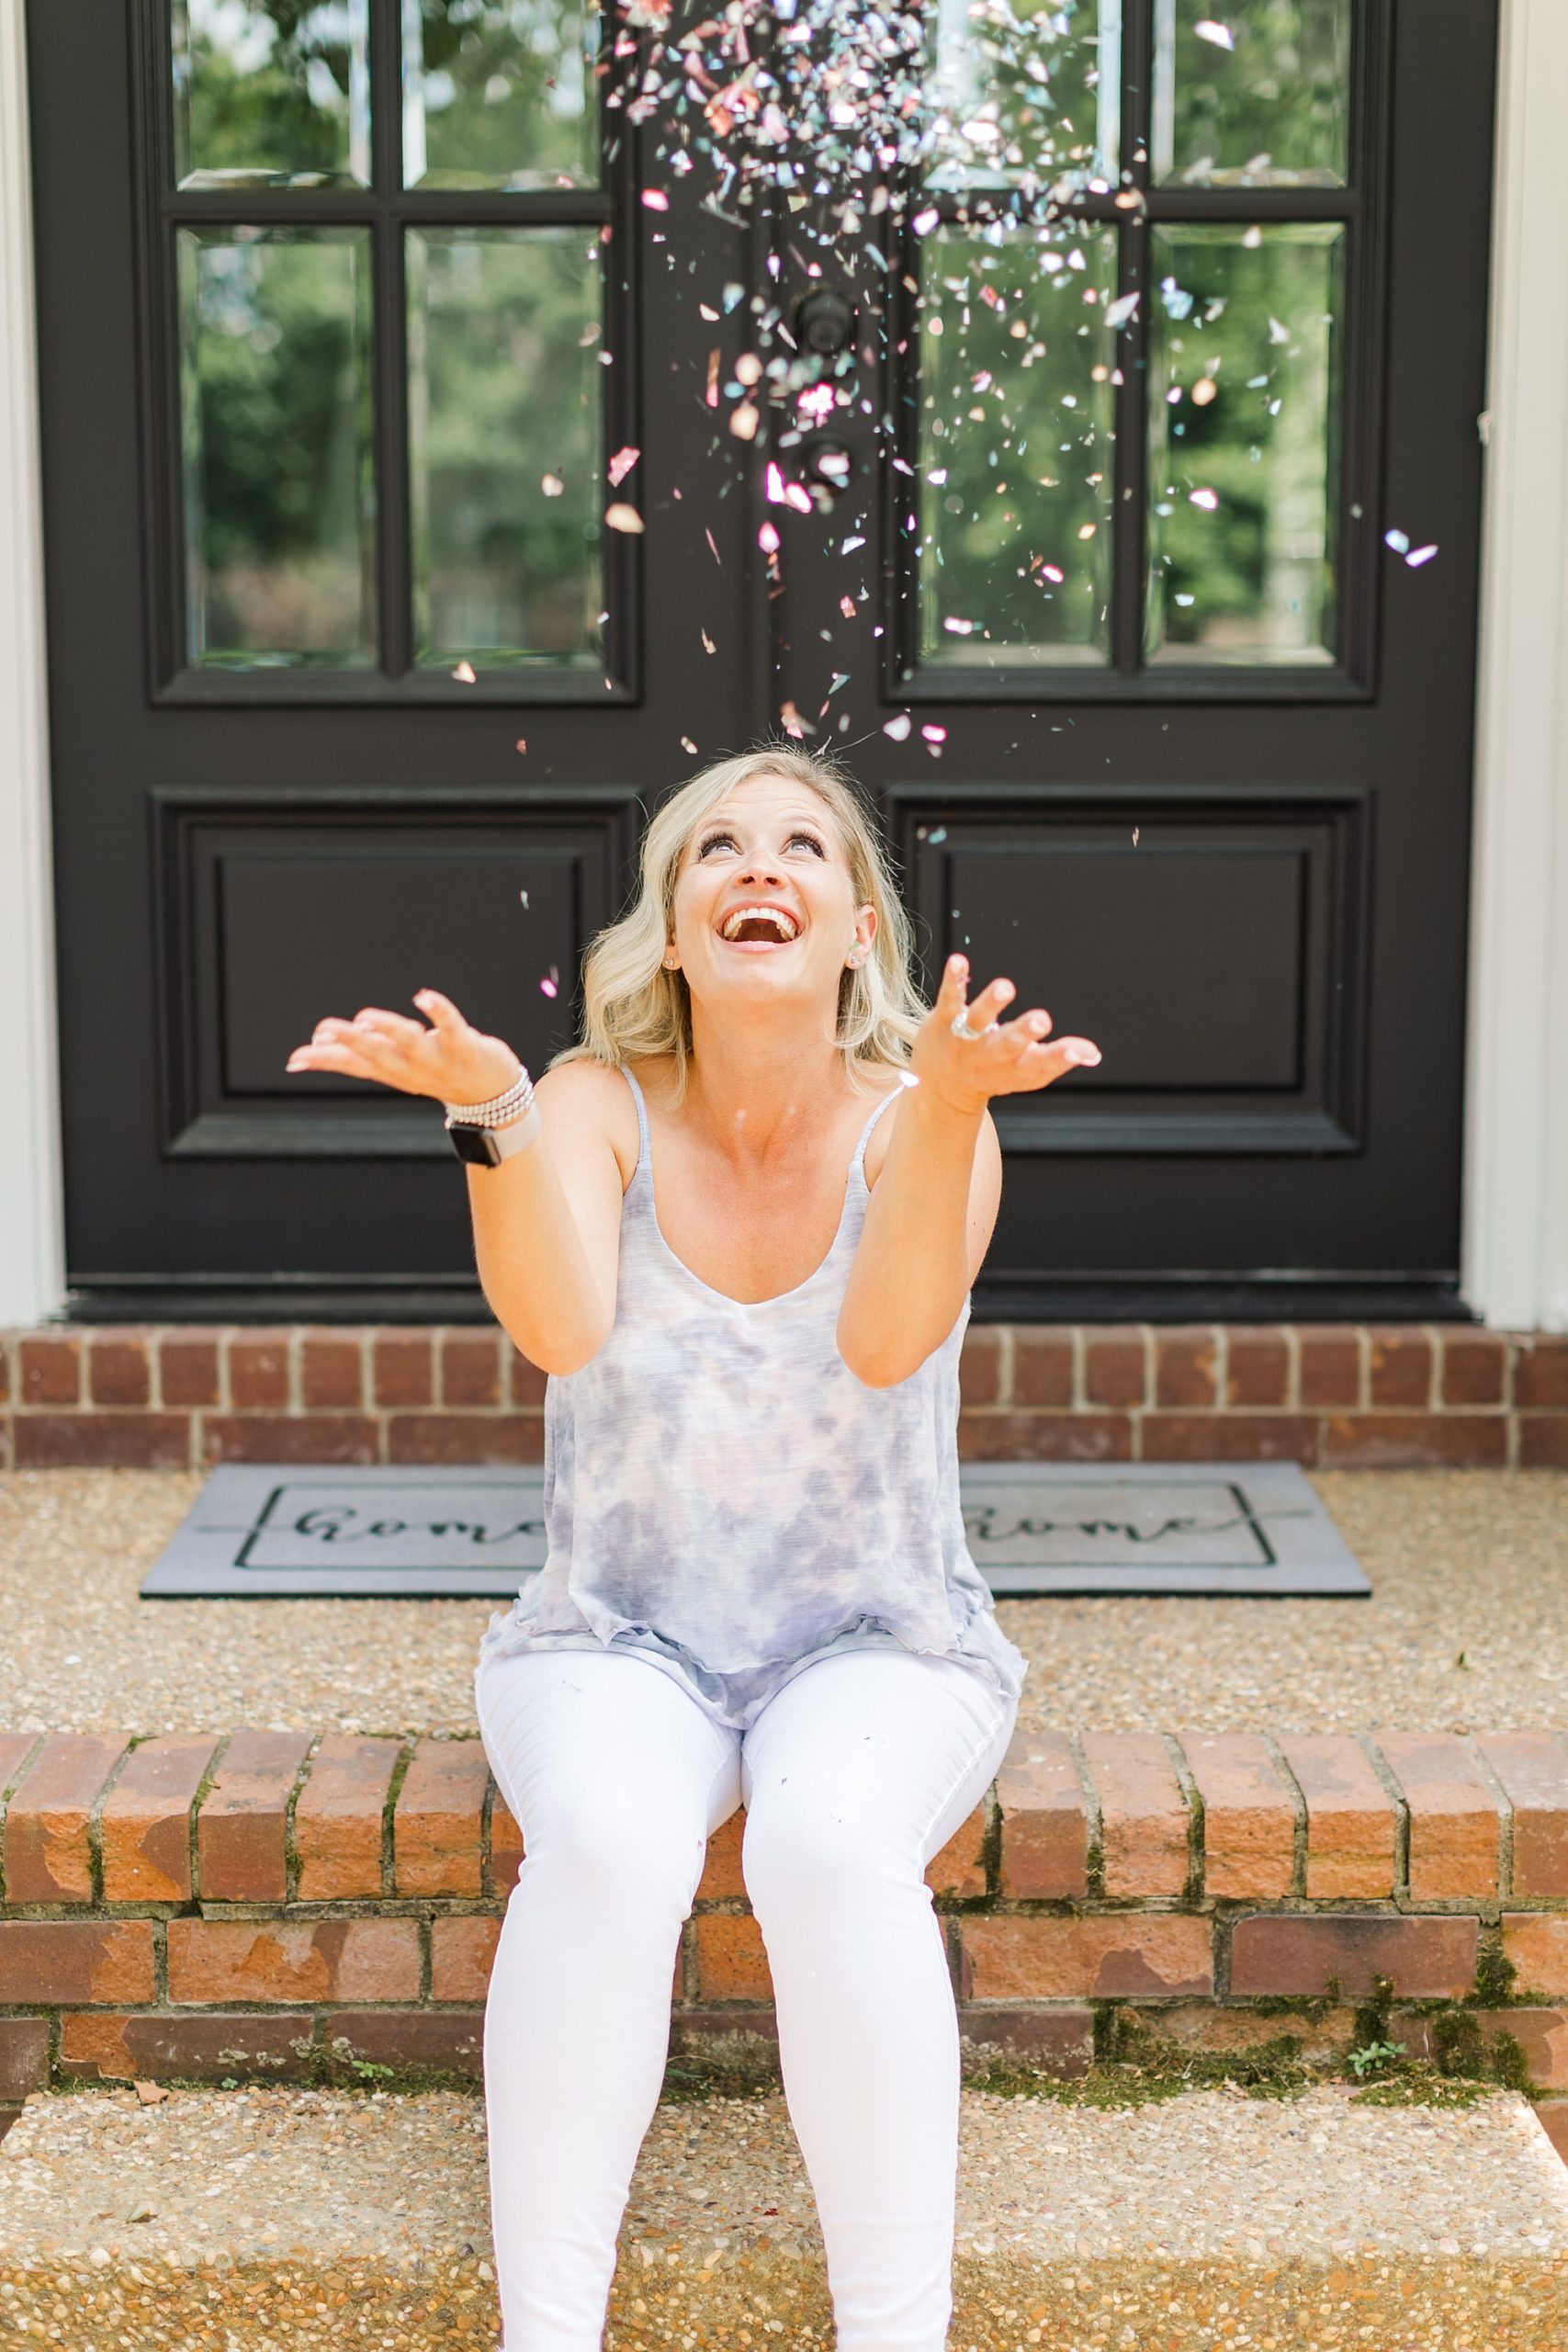 Disney planner throws confetti on front steps of home